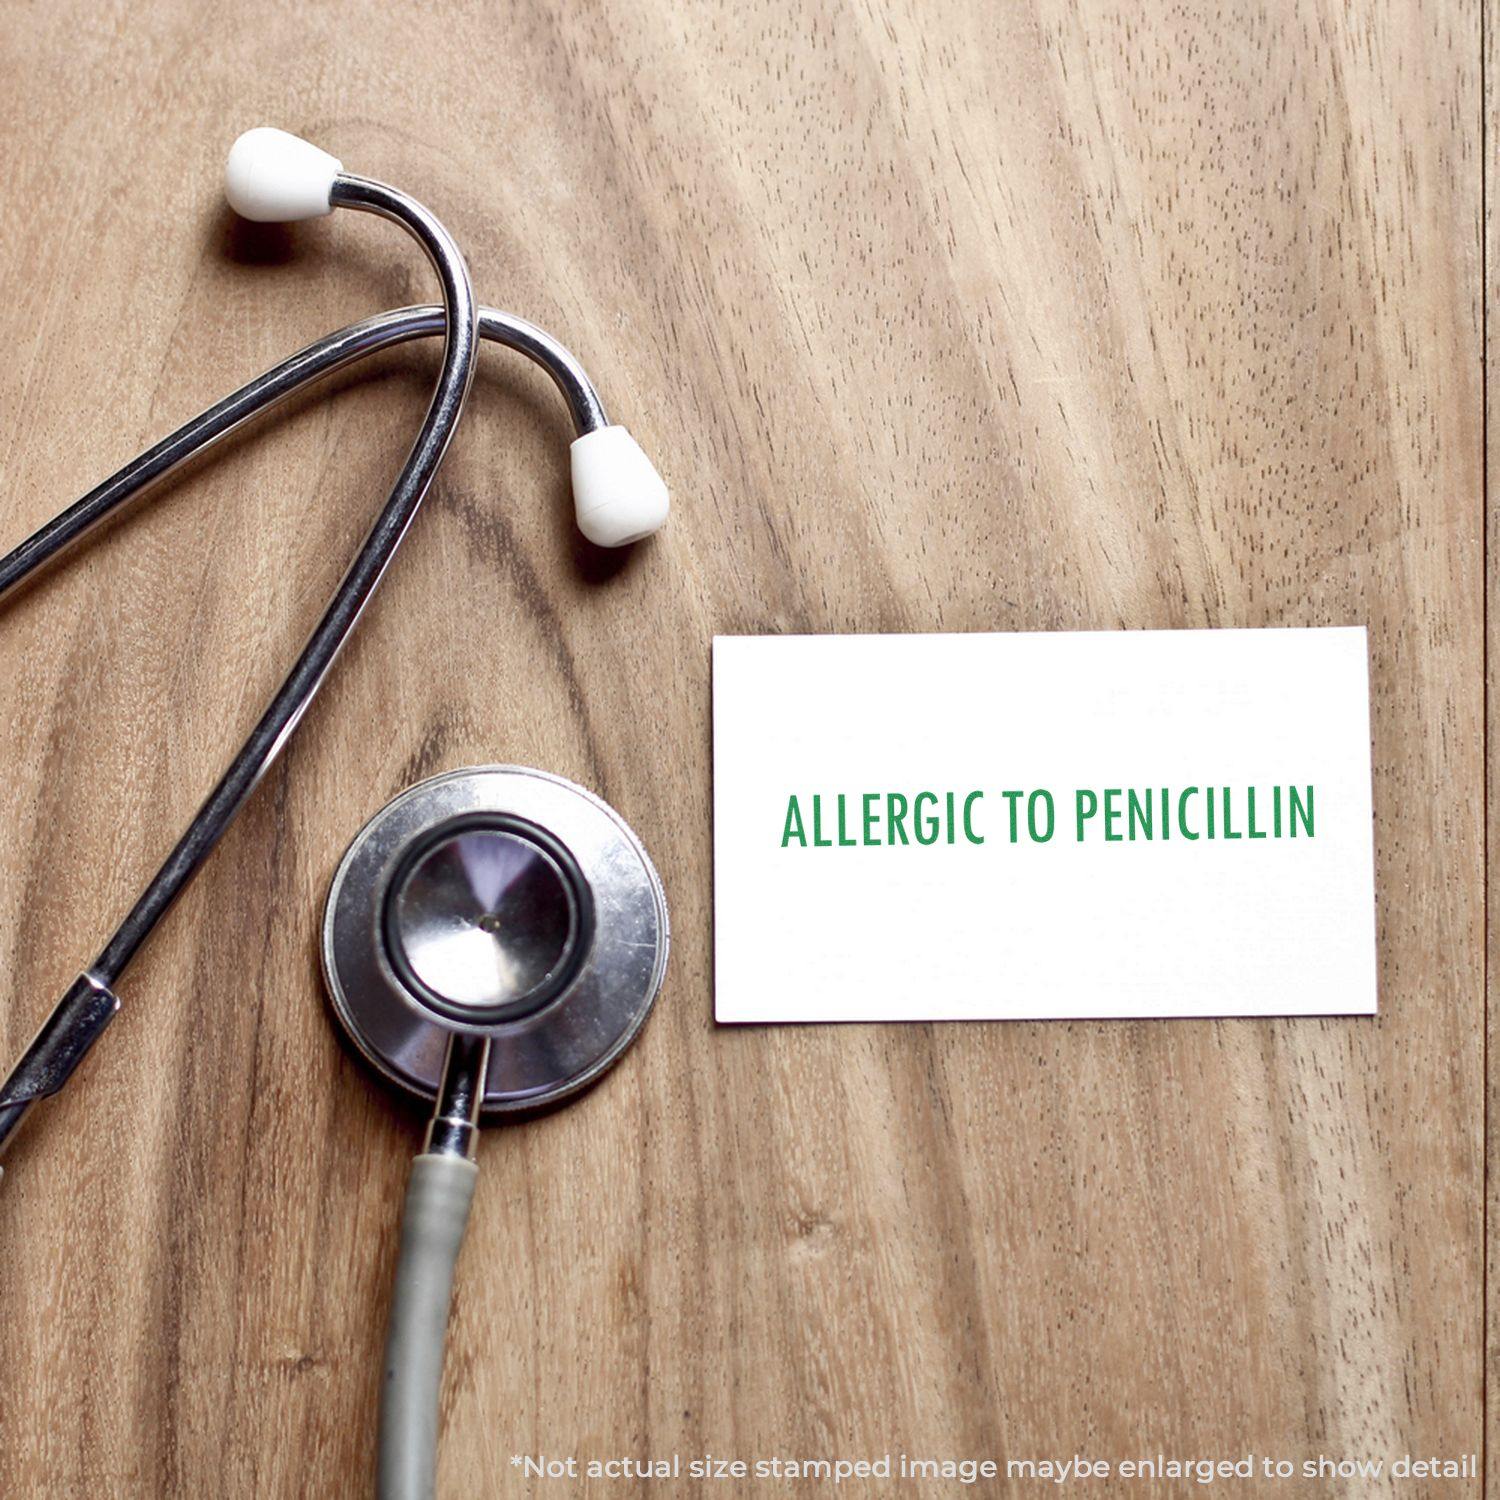 A stock office medical rubber stamp with a stamped image showing how the text "ALLERGIC TO PENICILLIN" is displayed after stamping.